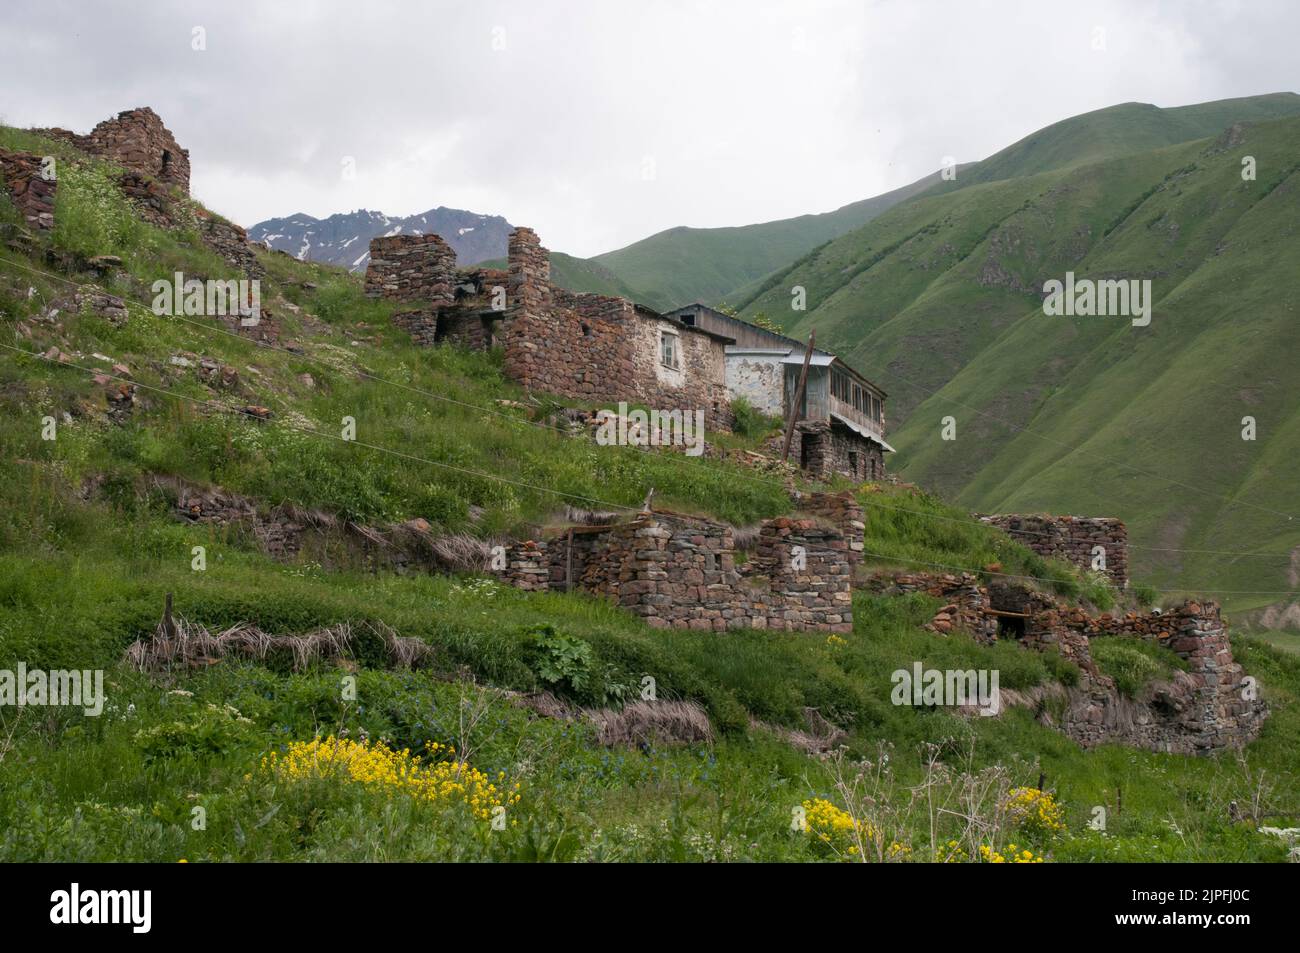 Abandoned and ransacked Ossetian village in the High Caucasus, Georgia, bordering the Russian-sponsored renegade territory of South Ossetia Stock Photo